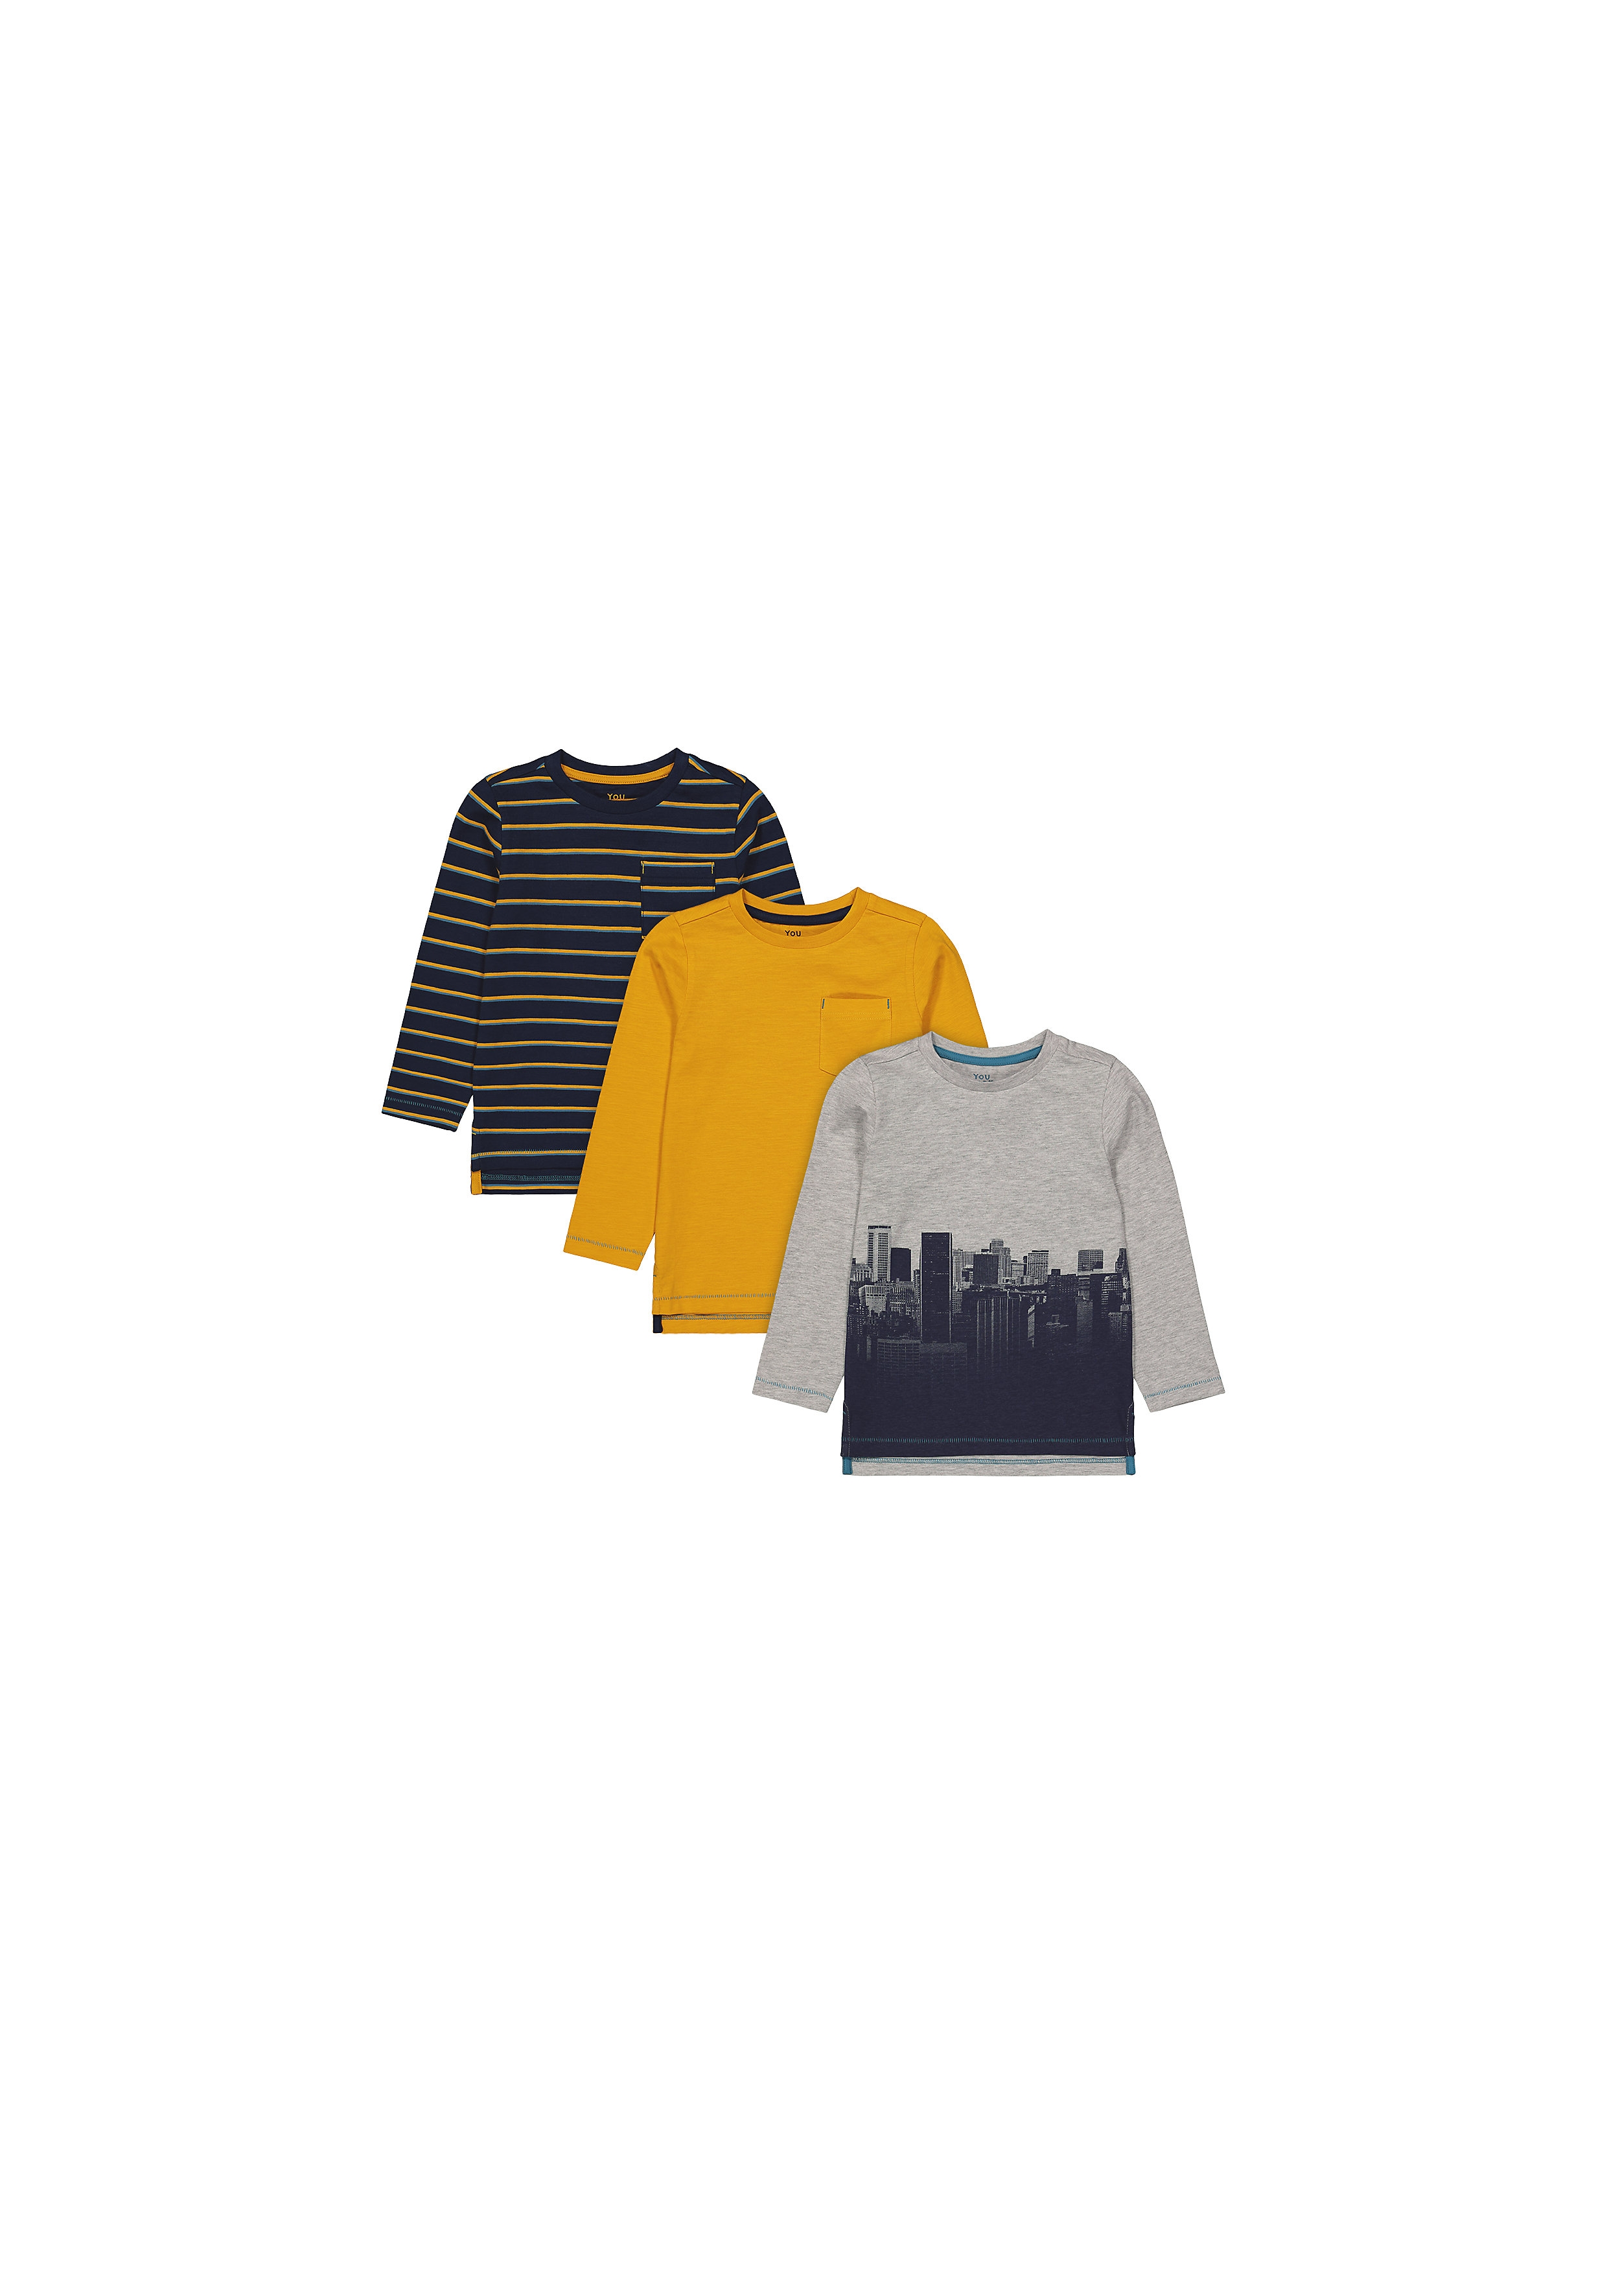 Mothercare | Boys Full Sleeves Round Neck T-shirts  - Pack Of 3 - Multicolor